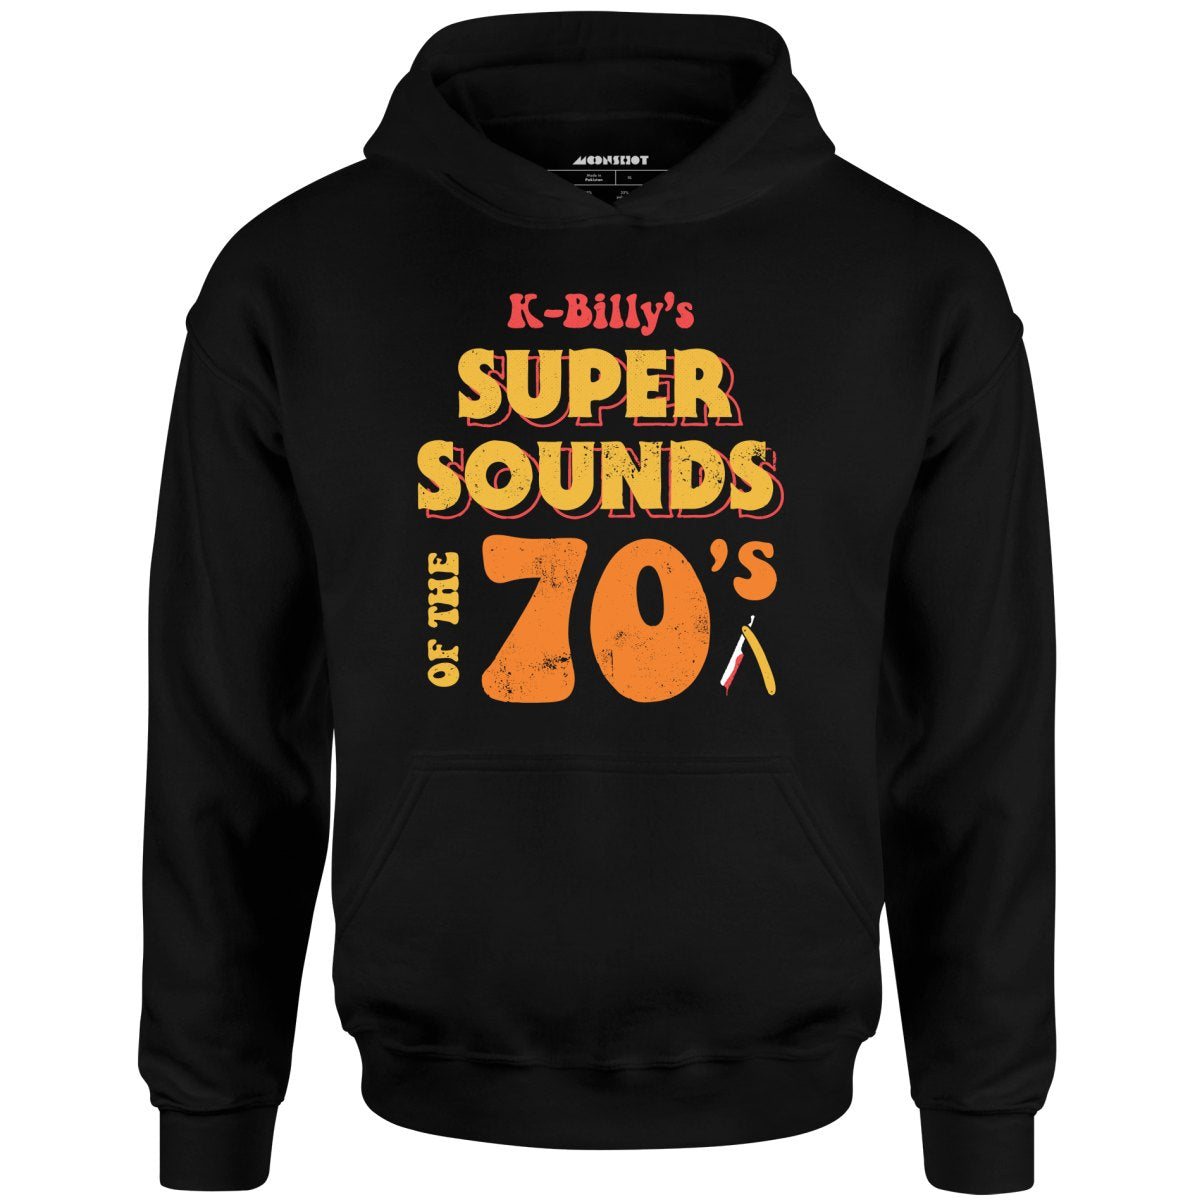 K-Billy's Super Sounds of the 70s - Unisex Hoodie